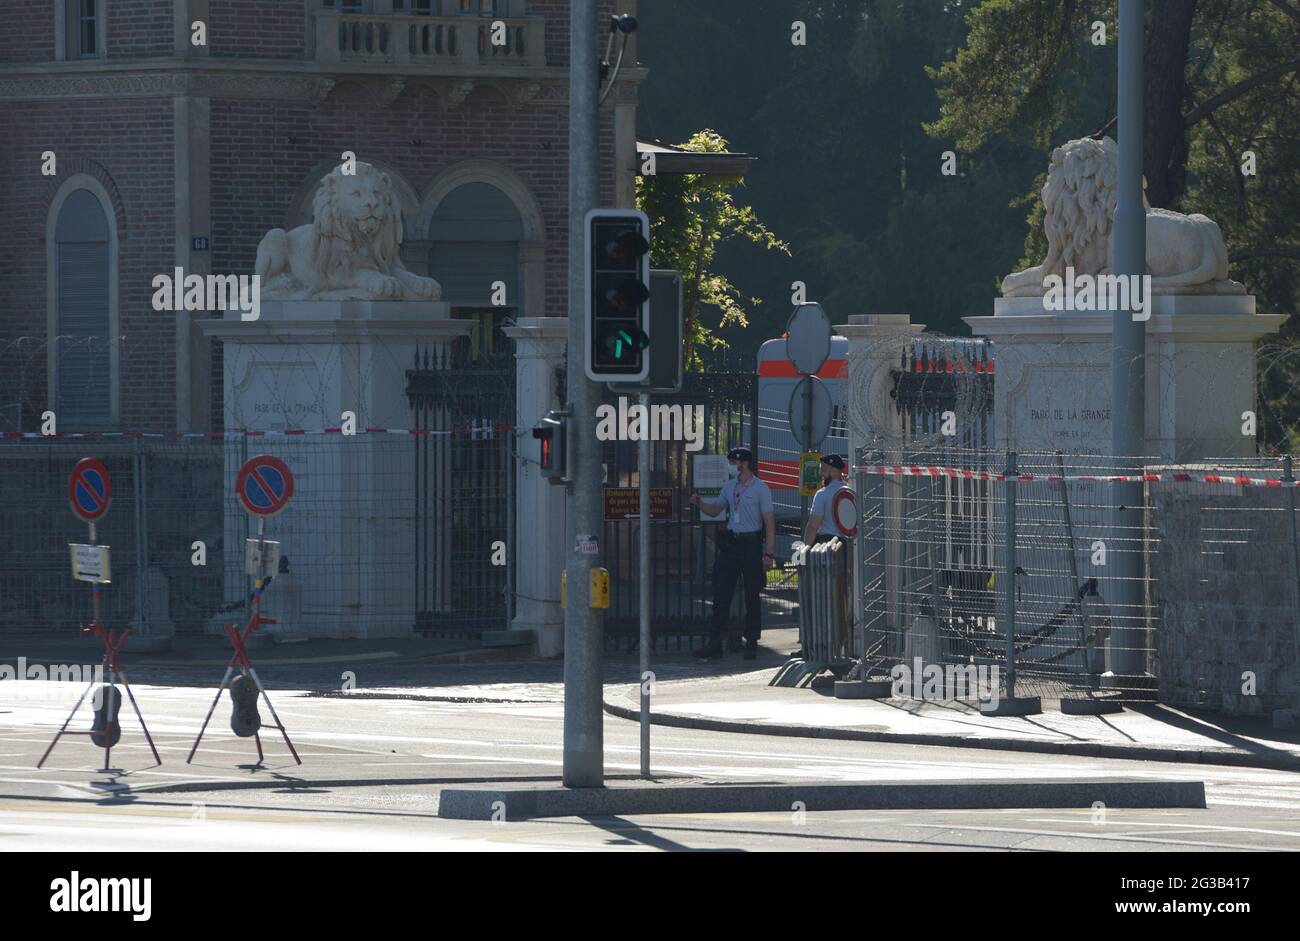 Geneva, Switzerland. 15th June, 2021. Security officers stand guard at an entrance to the Villa La Grange, the venue for the upcoming Biden-Putin summit, in Geneva, Switzerland, on June 15, 2021. U.S. President Joe Biden and his Russian counterpart Vladimir Putin are set to meet in the Swiss city of Geneva on Wednesday, which will be the two leaders' first face-to-face meeting since the Biden administration took office on Jan. 20. Credit: Guo Chen/Xinhua/Alamy Live News Stock Photo